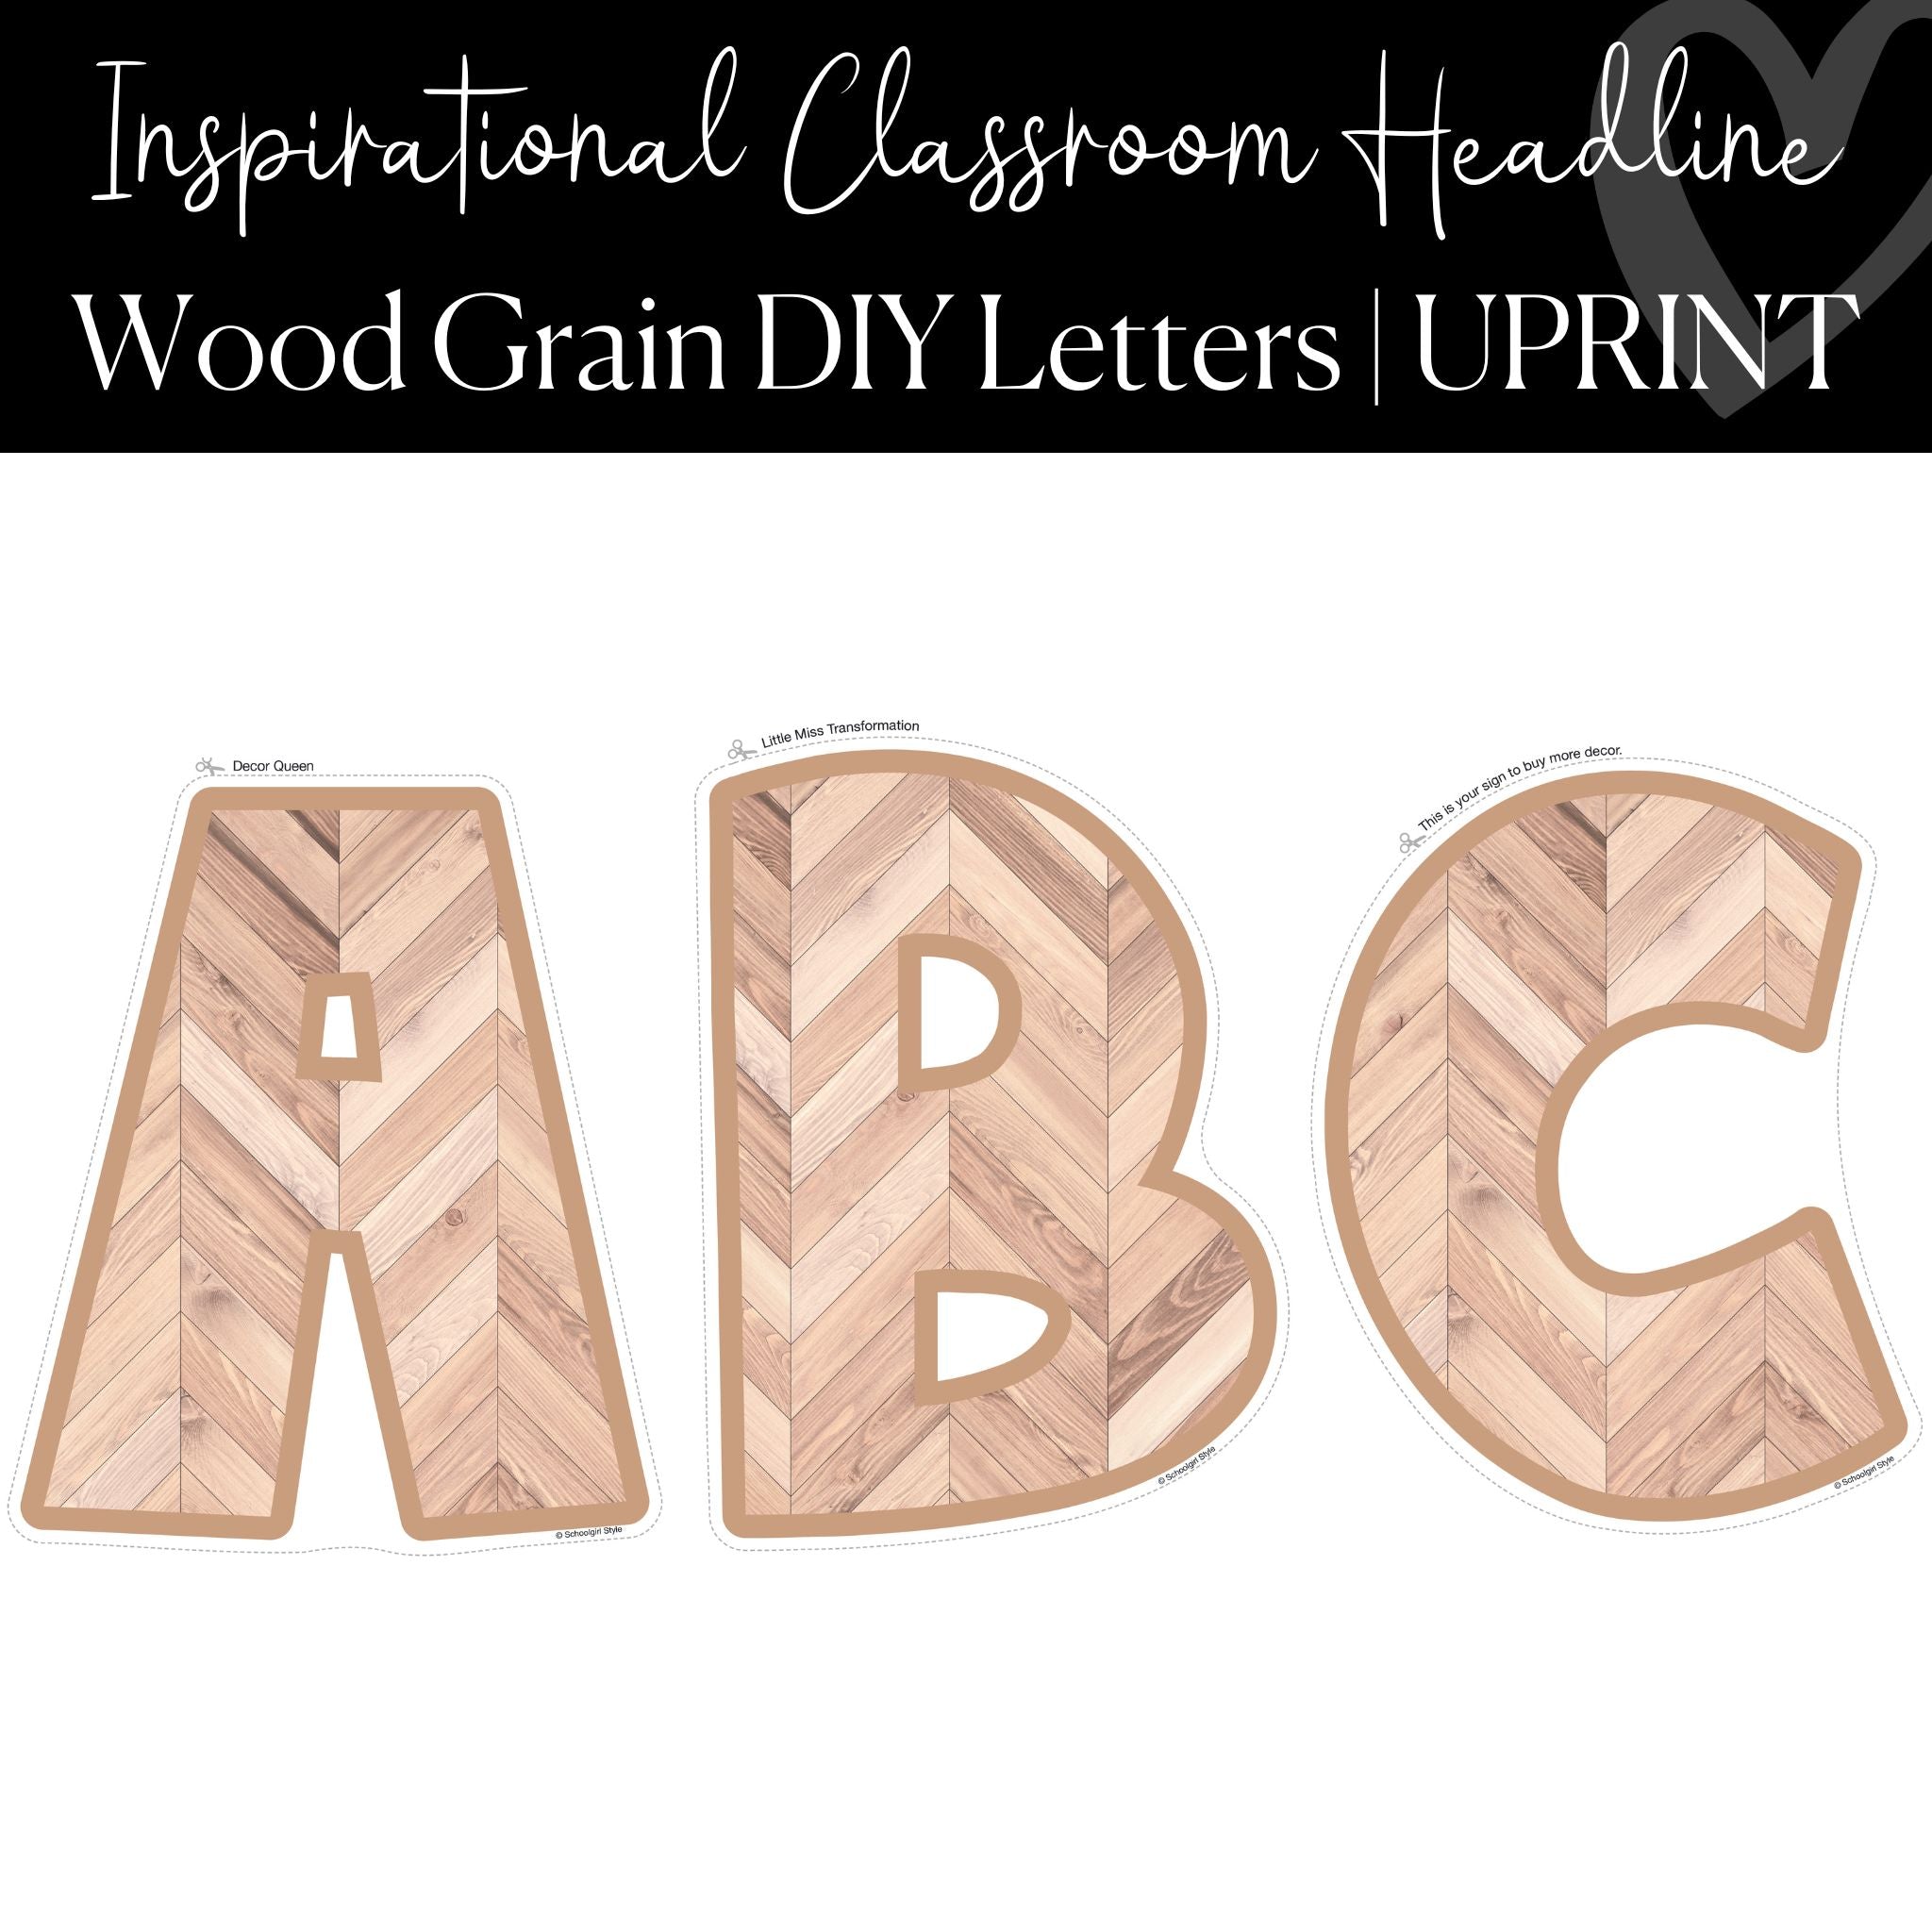 Retro New Year A-Z Bulletin Board Letters to create any saying you